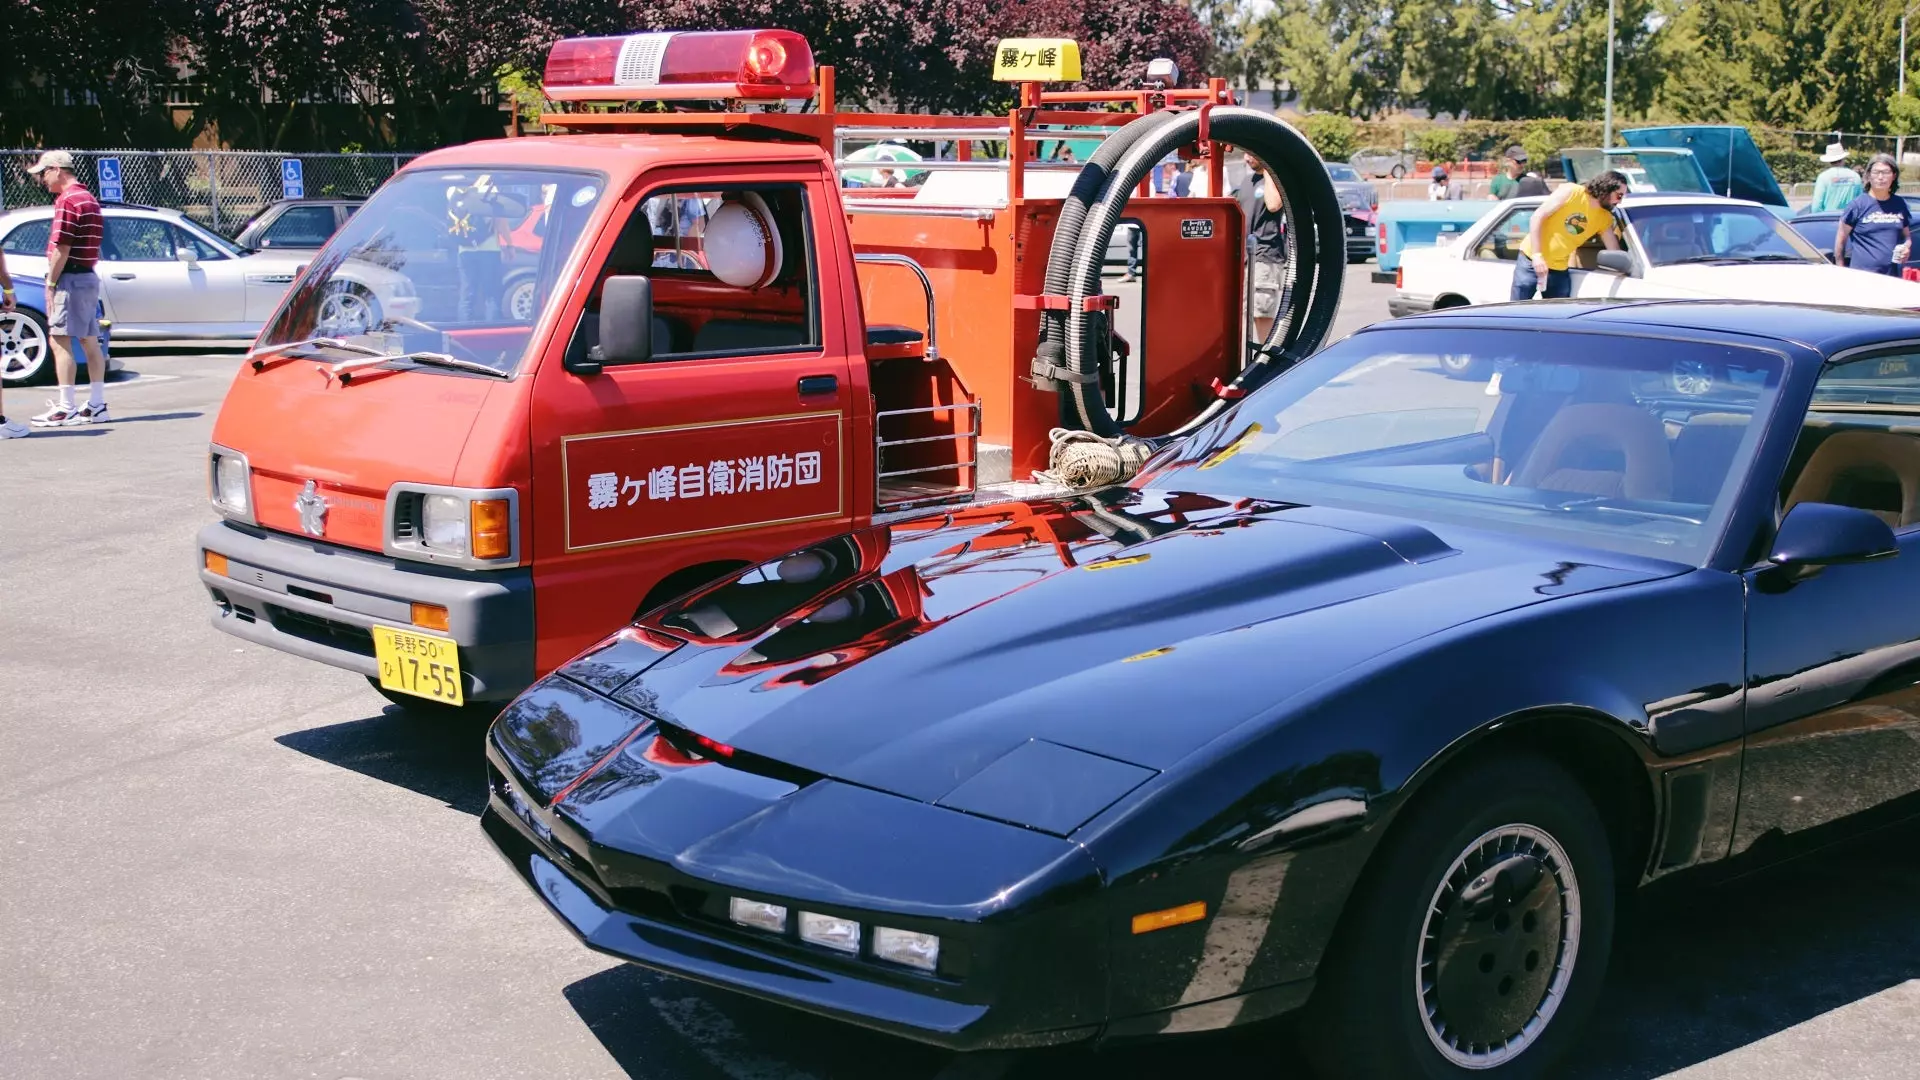 Who Knew KITT and a Japanese Fire Truck Could Be Fast Friends?